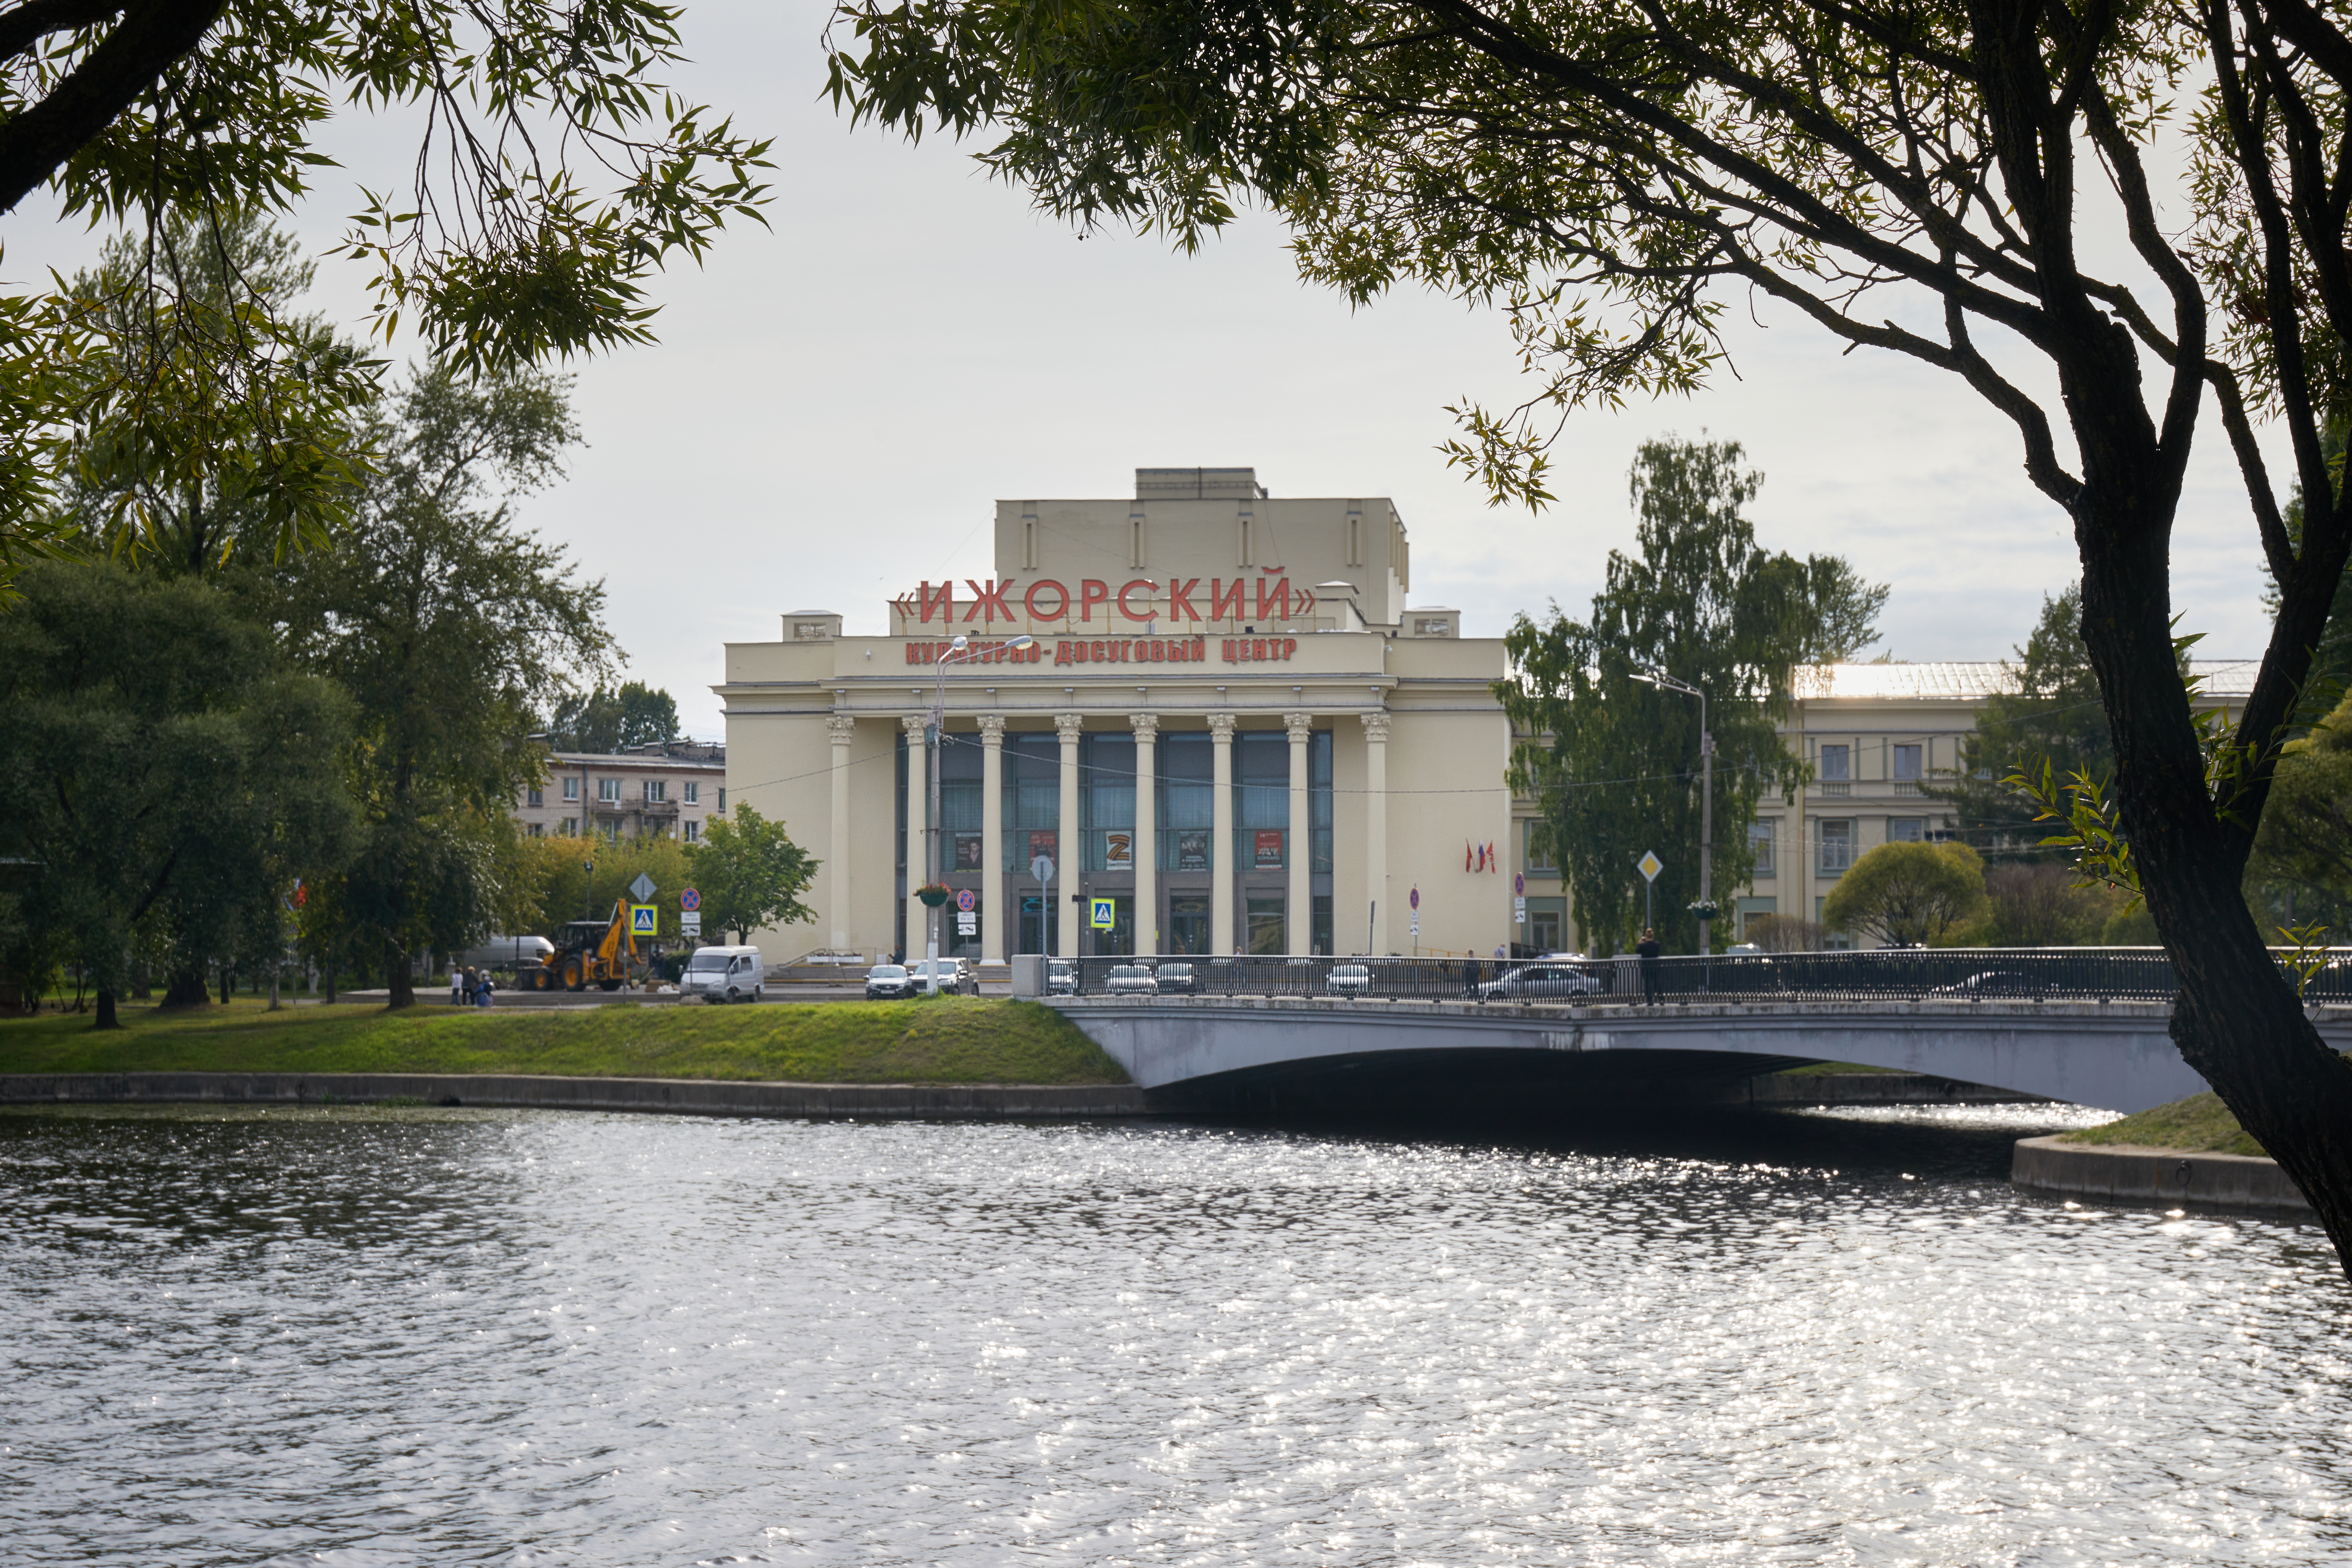 “Izhorsky” Cultural and Leisure Center